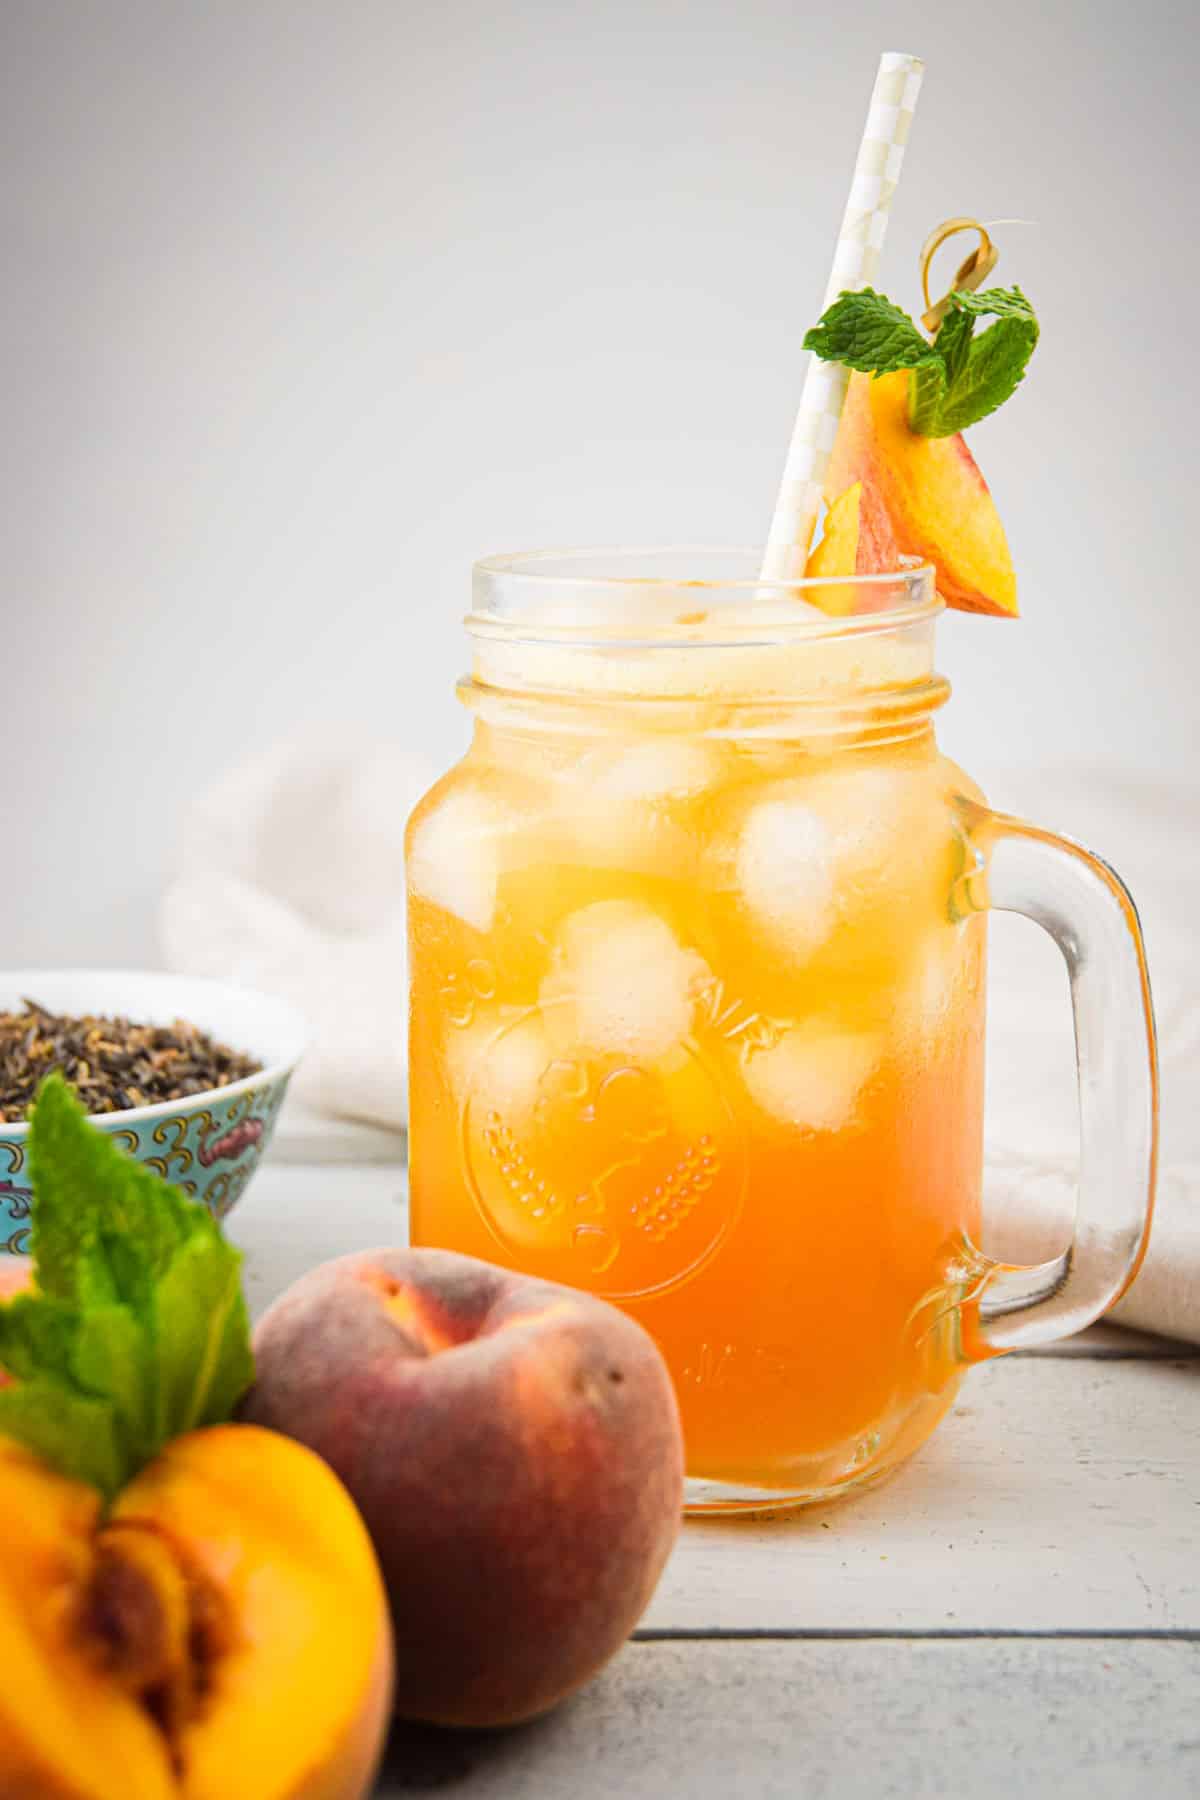 Iced peach green tea in glass with ice, straw and peach garnish.